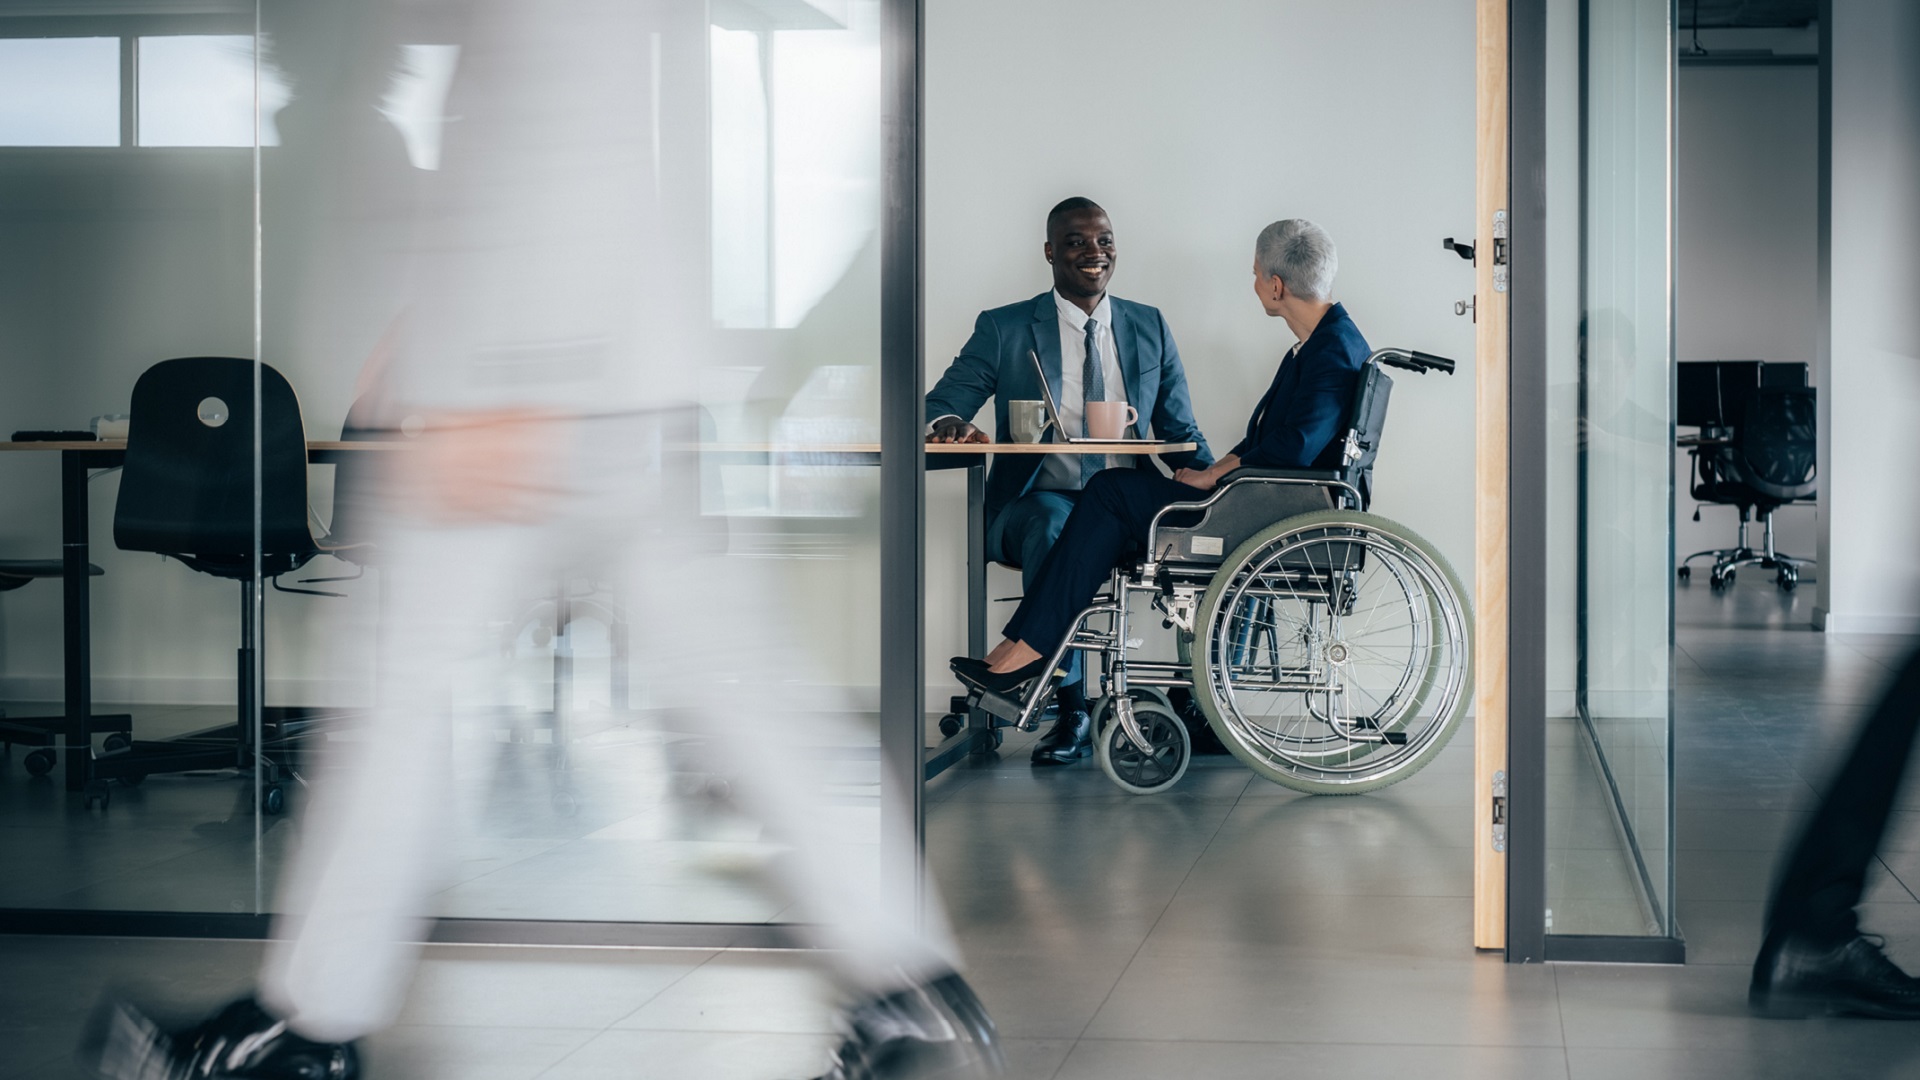 Business woman in wheelchair having meeting in office, someone walks by in the foreground blurred motion